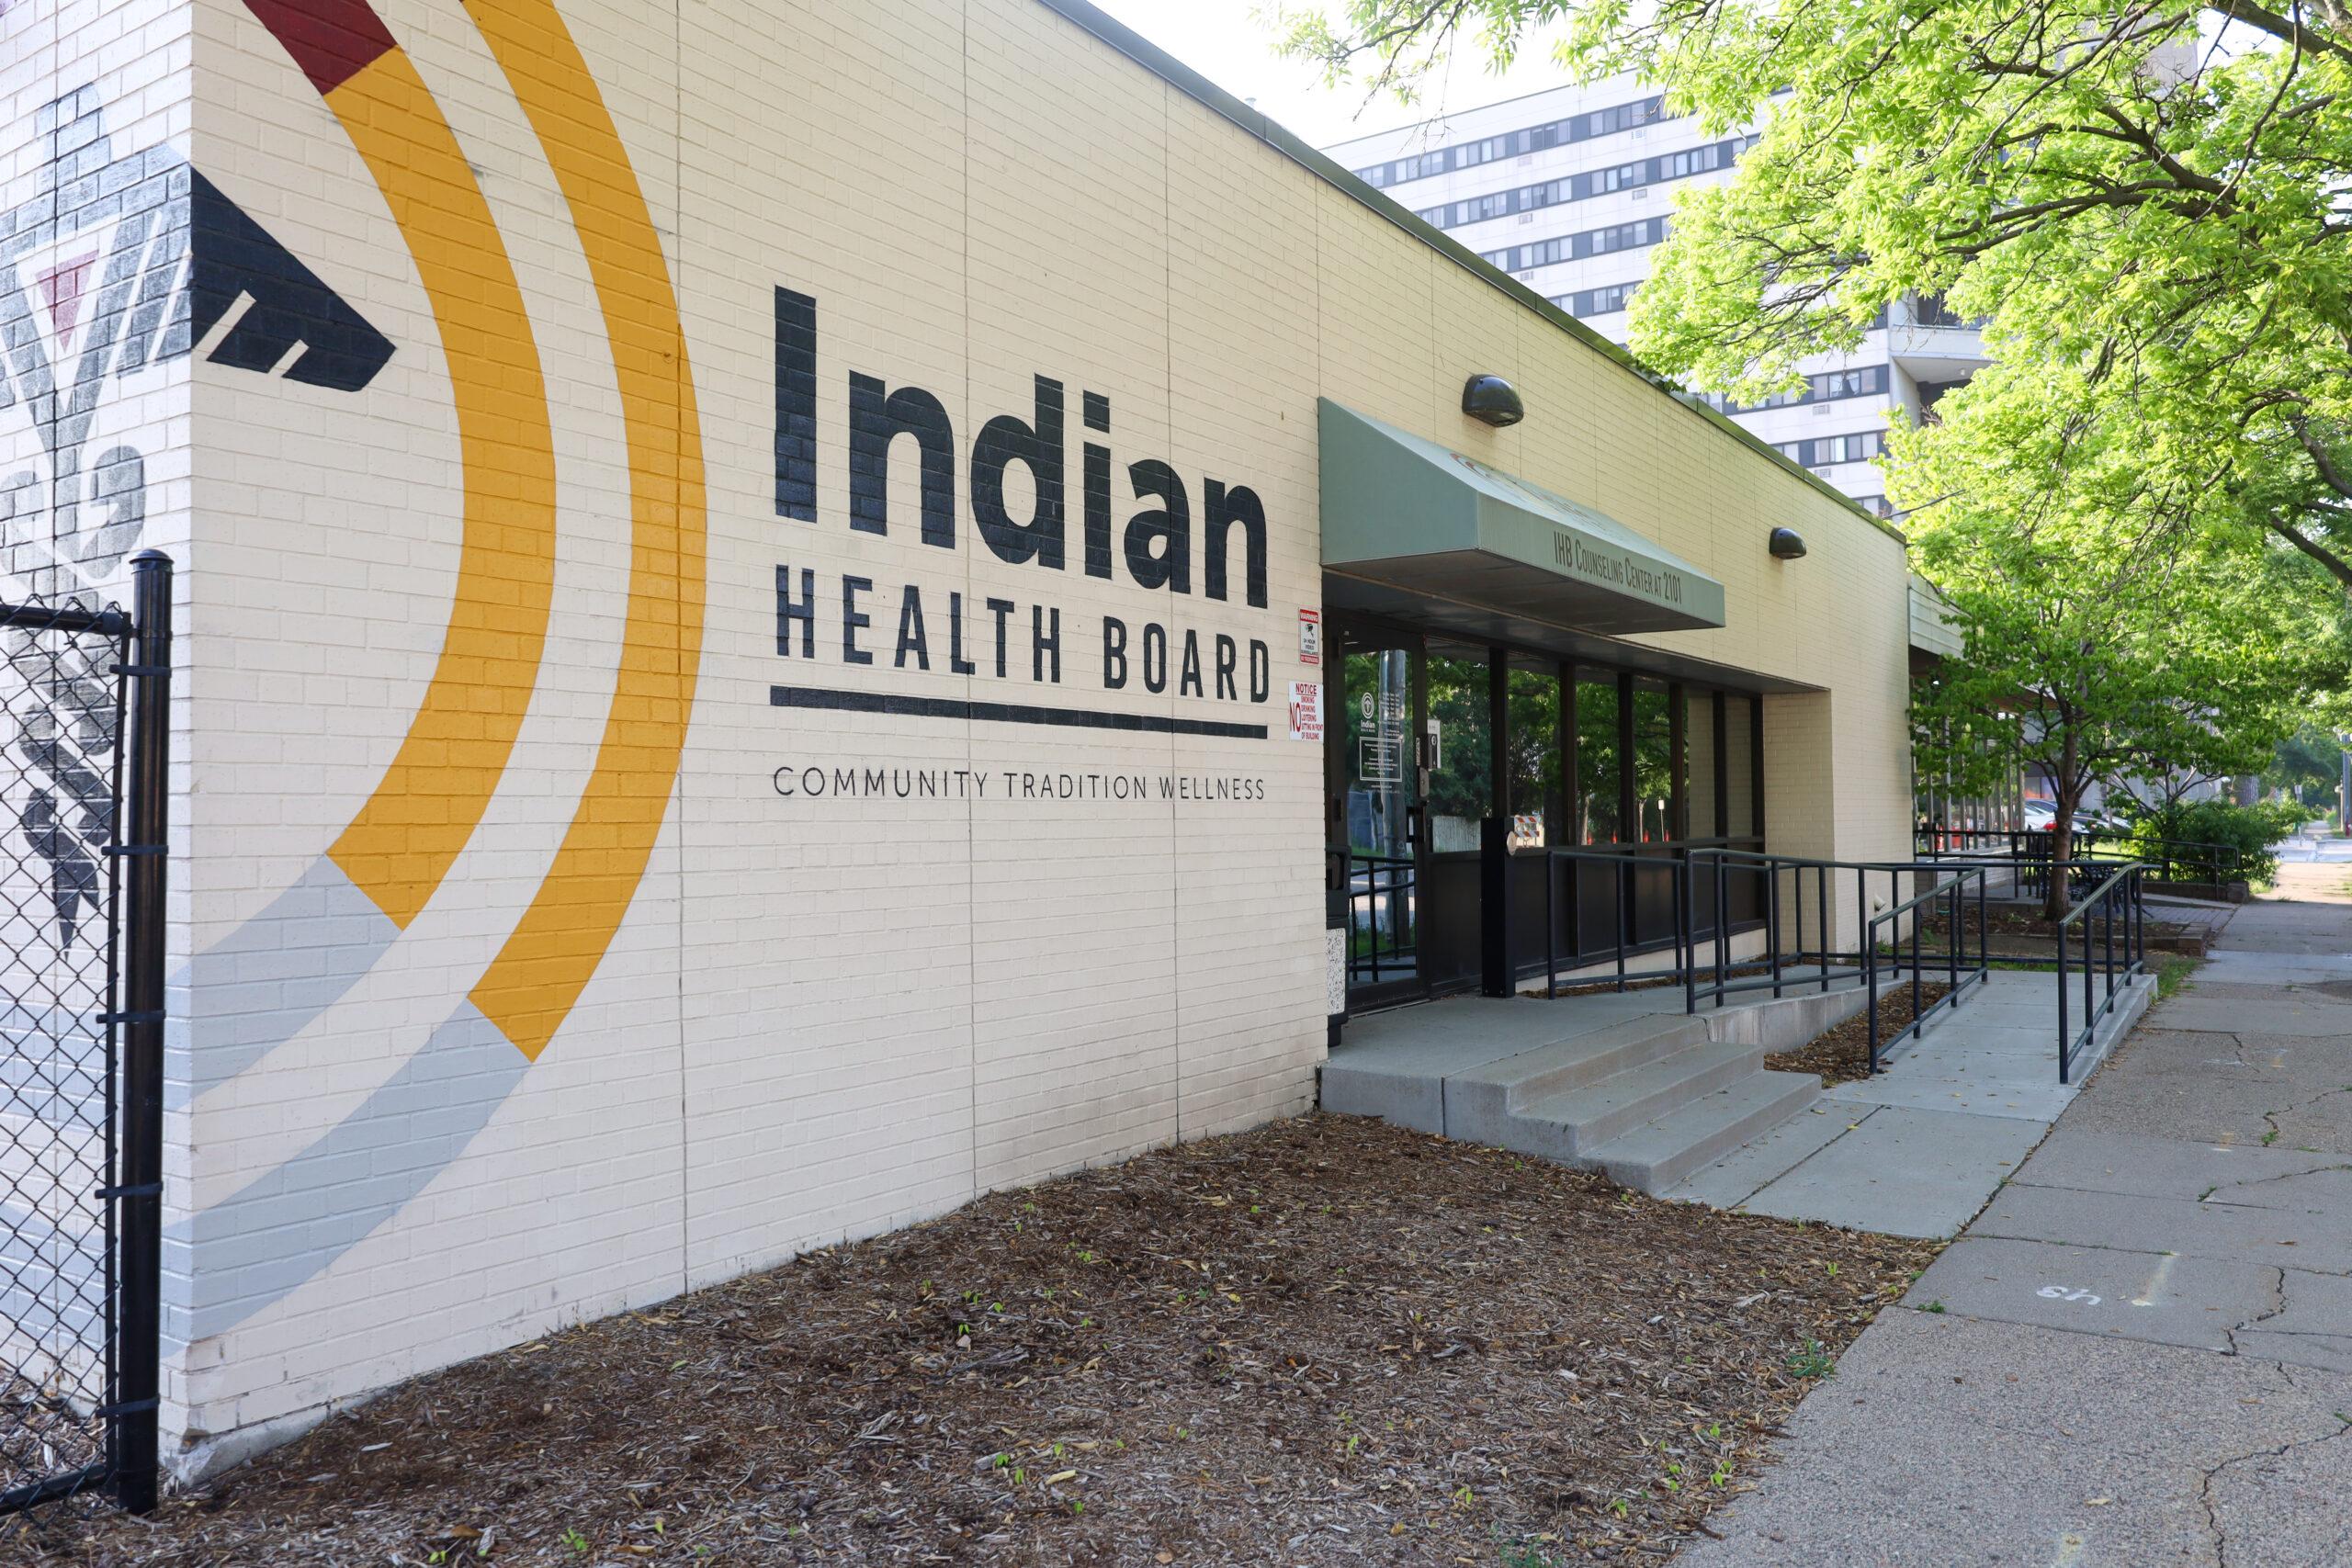 This is the front entrance of IHB Counseling Center, serving the American Indian community in Minneapolis and St Paul.